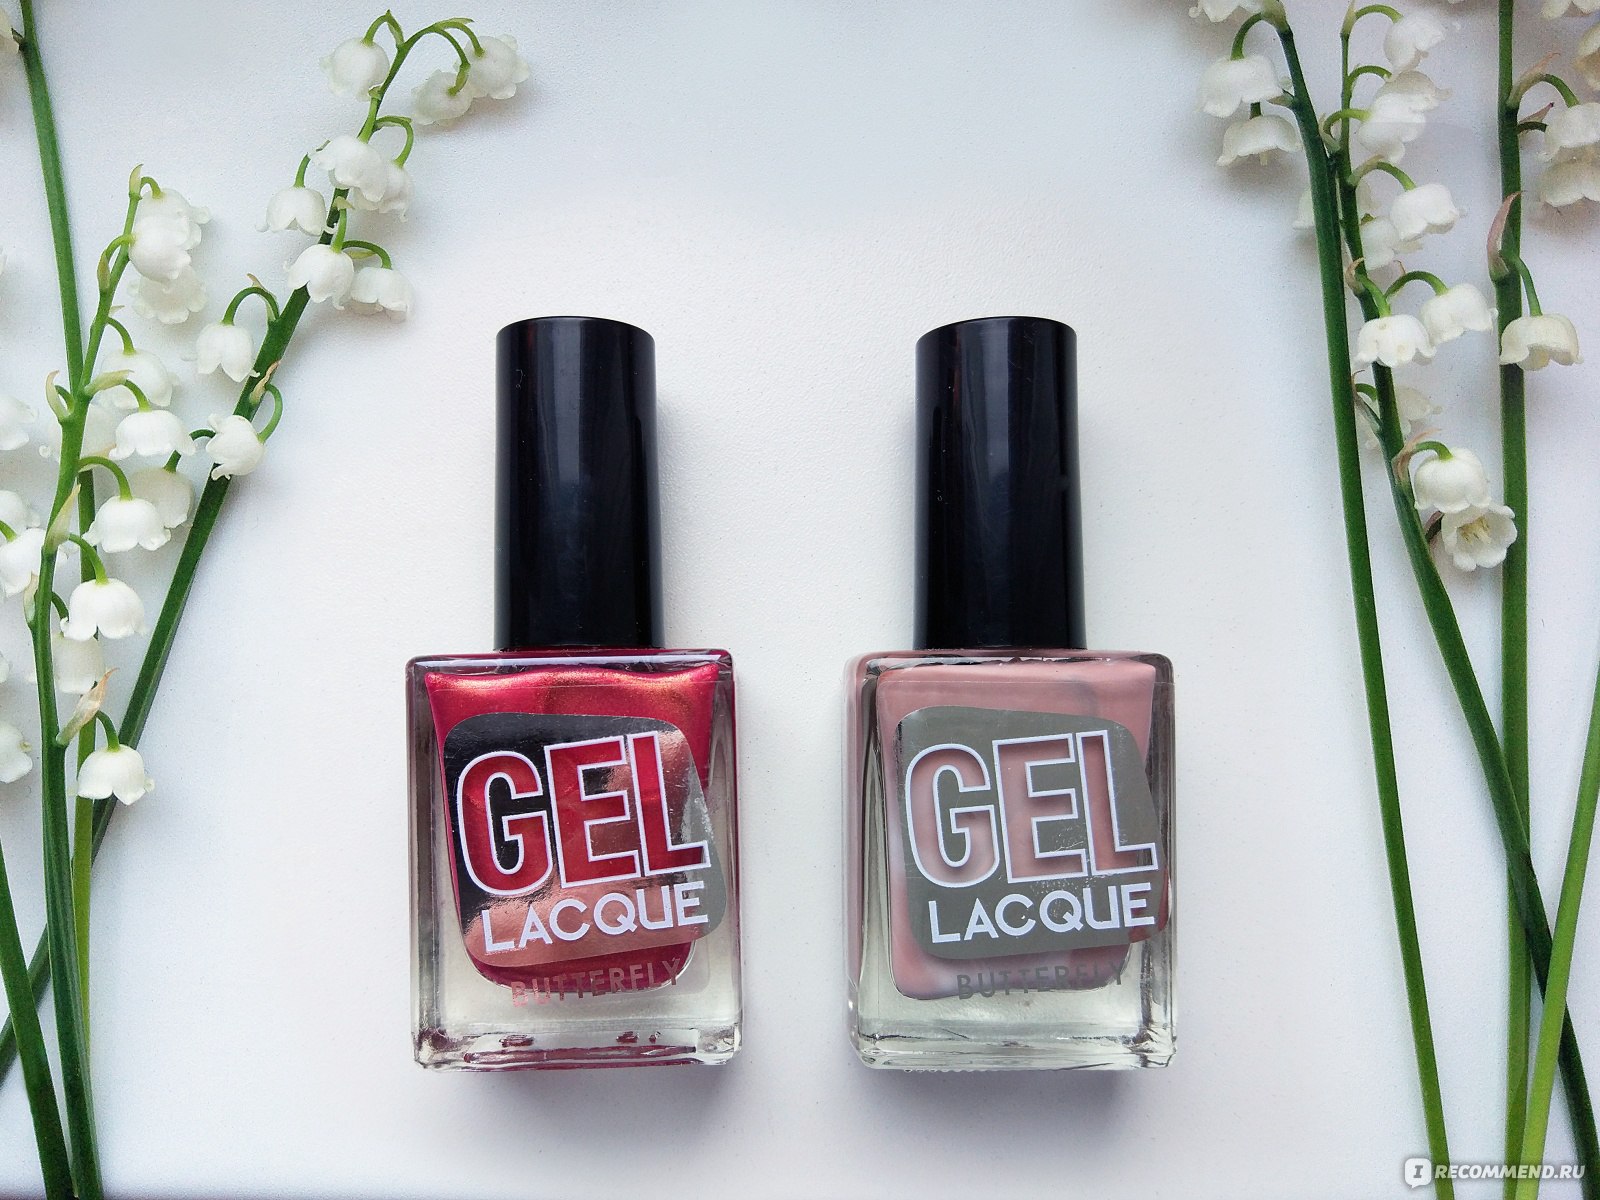 Gel lacquer. Gel Lacquer Butterfly. Лак-гель Butterfly VIN-yi. Лак-гель Butterfly VIN-yi 04. Lucky оттенок 314.